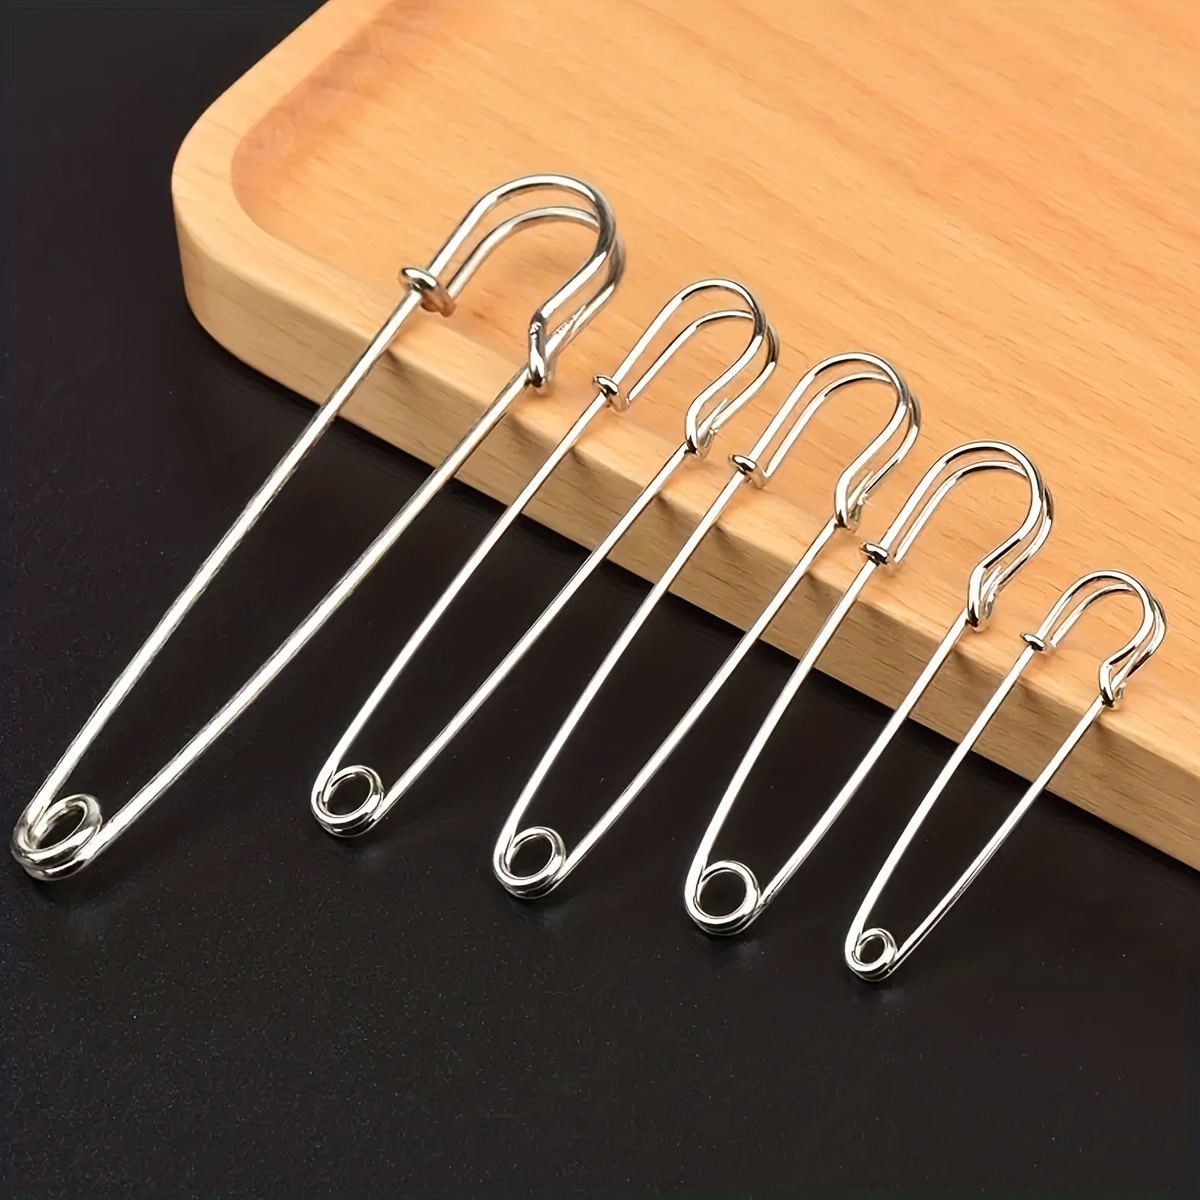 50pcs Clear Heads Twist Pins With Storage Box Upholstery Tacks Headliner  Pins Bed Skirt Pins For Holds Slipcovers And Bed Skirt